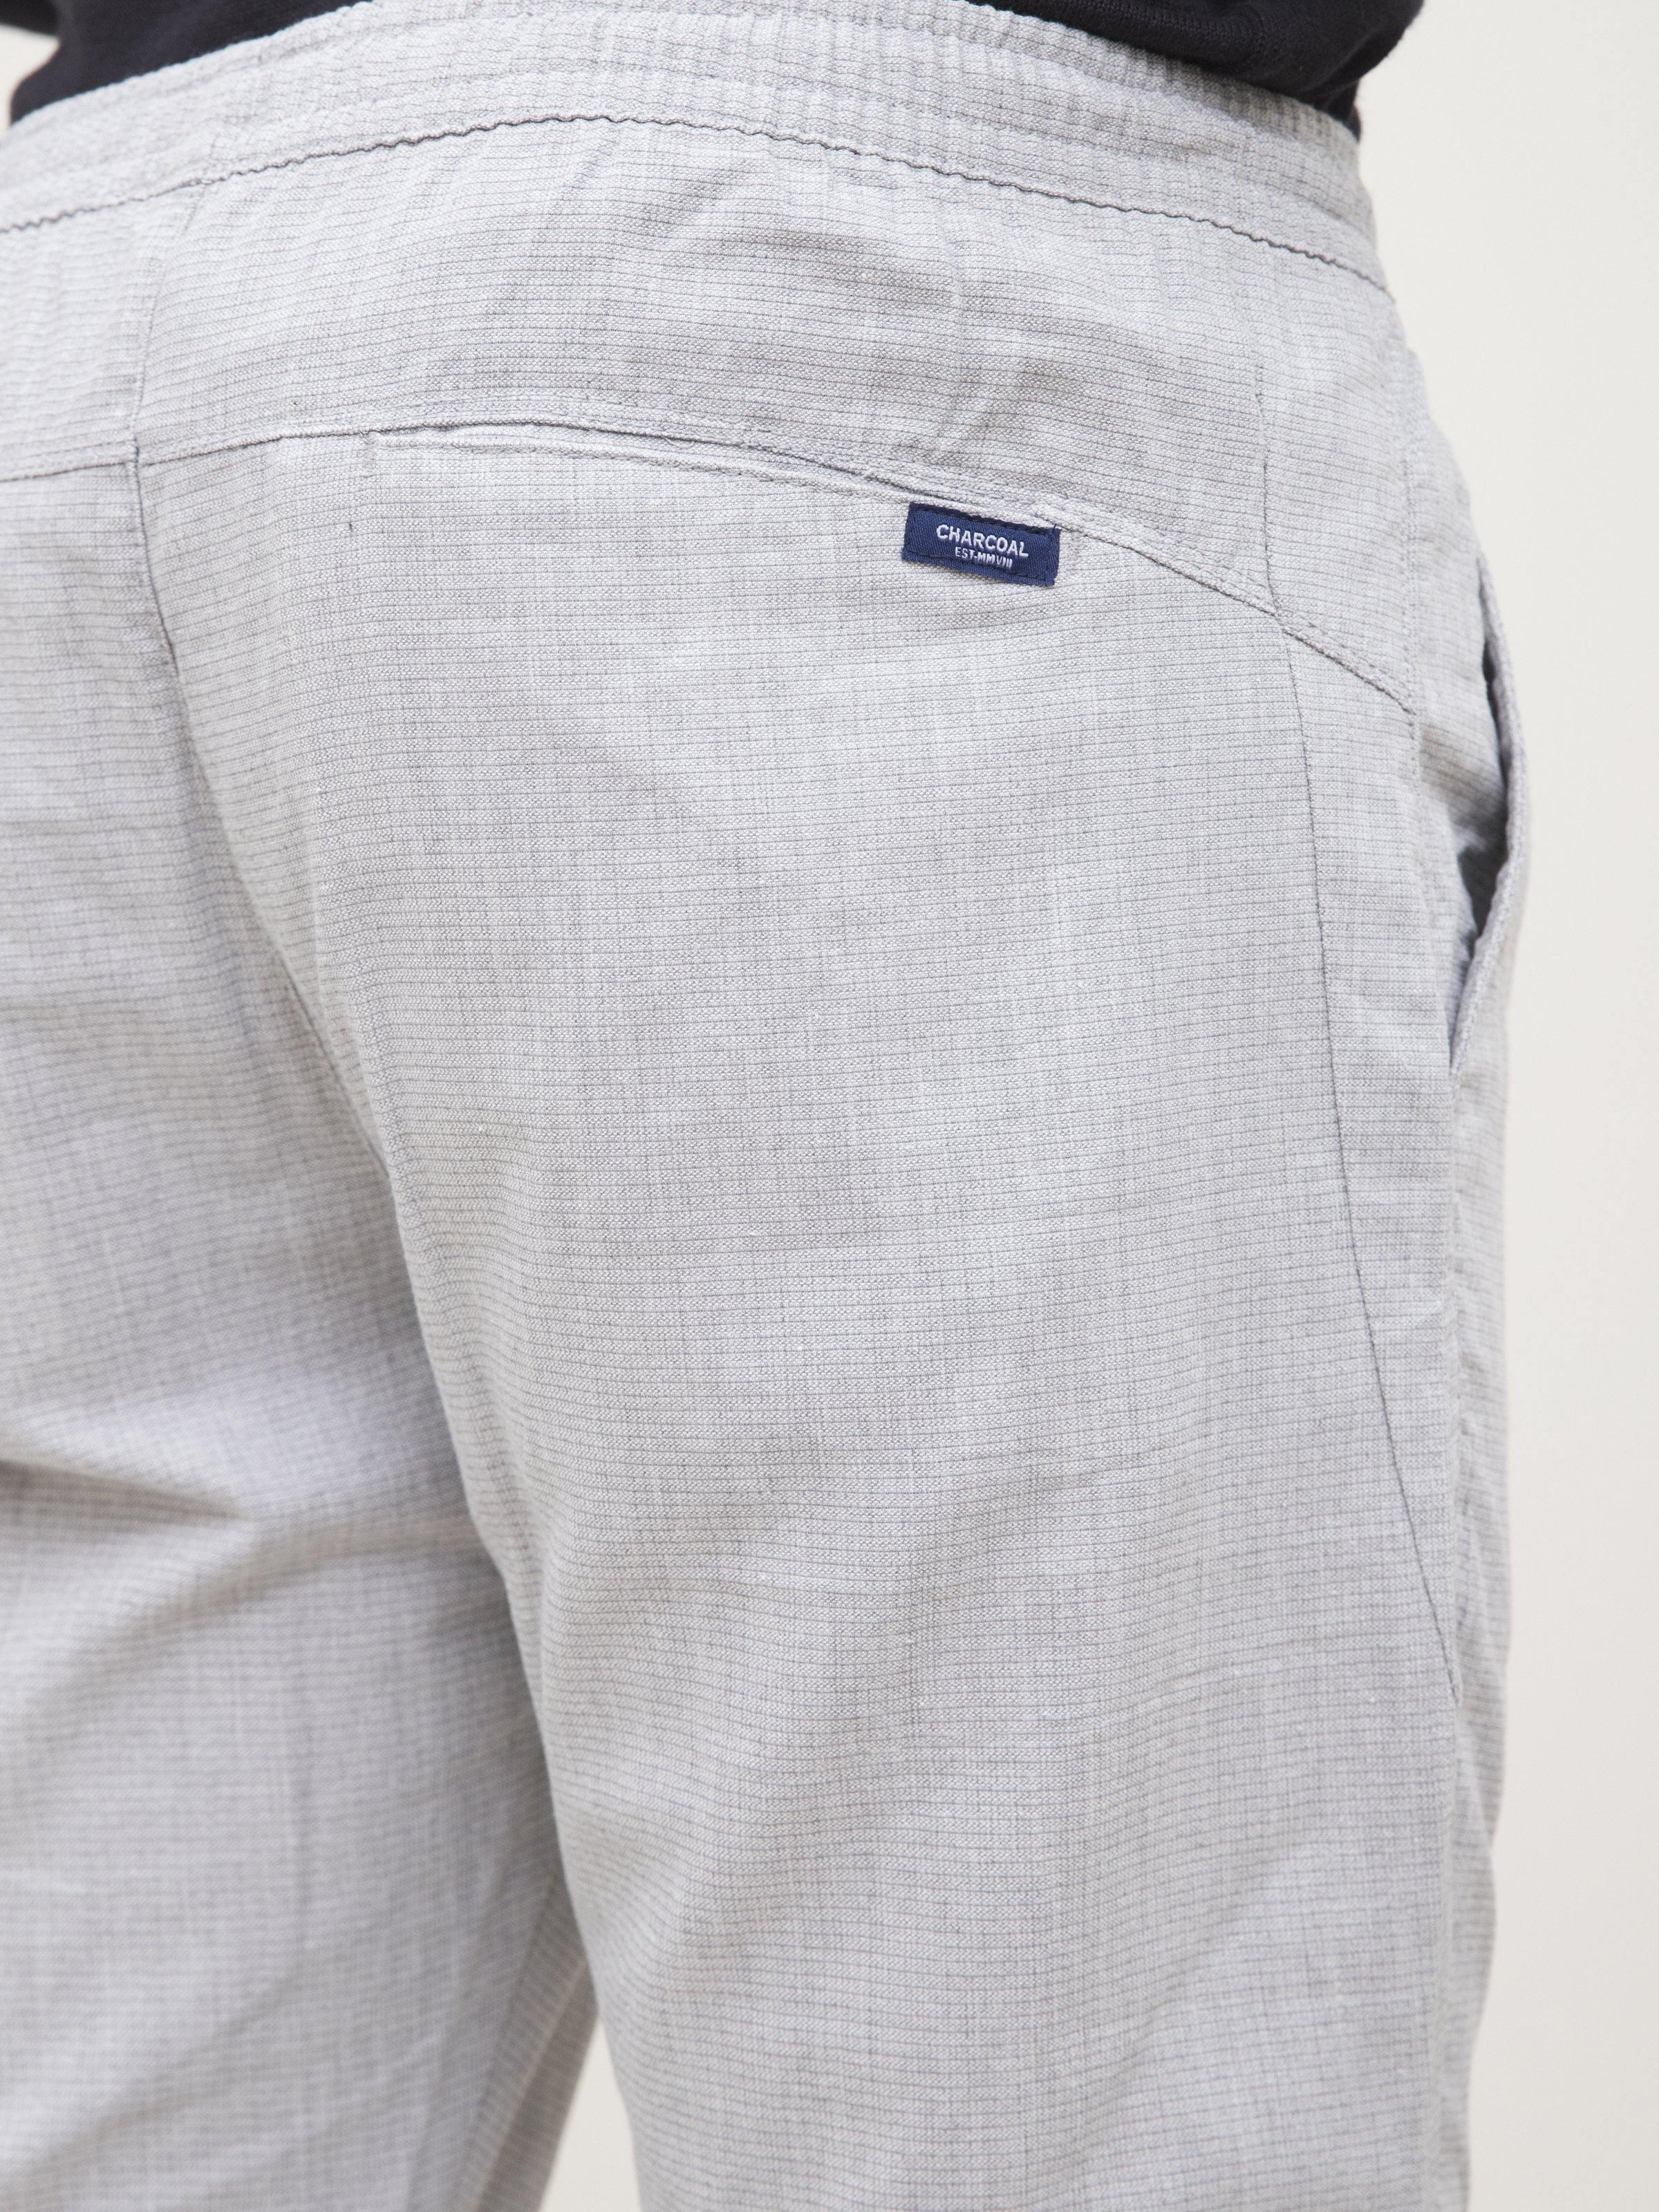 SELF TEXTURED CASUAL TROUSER GREY WHITE at Charcoal Clothing